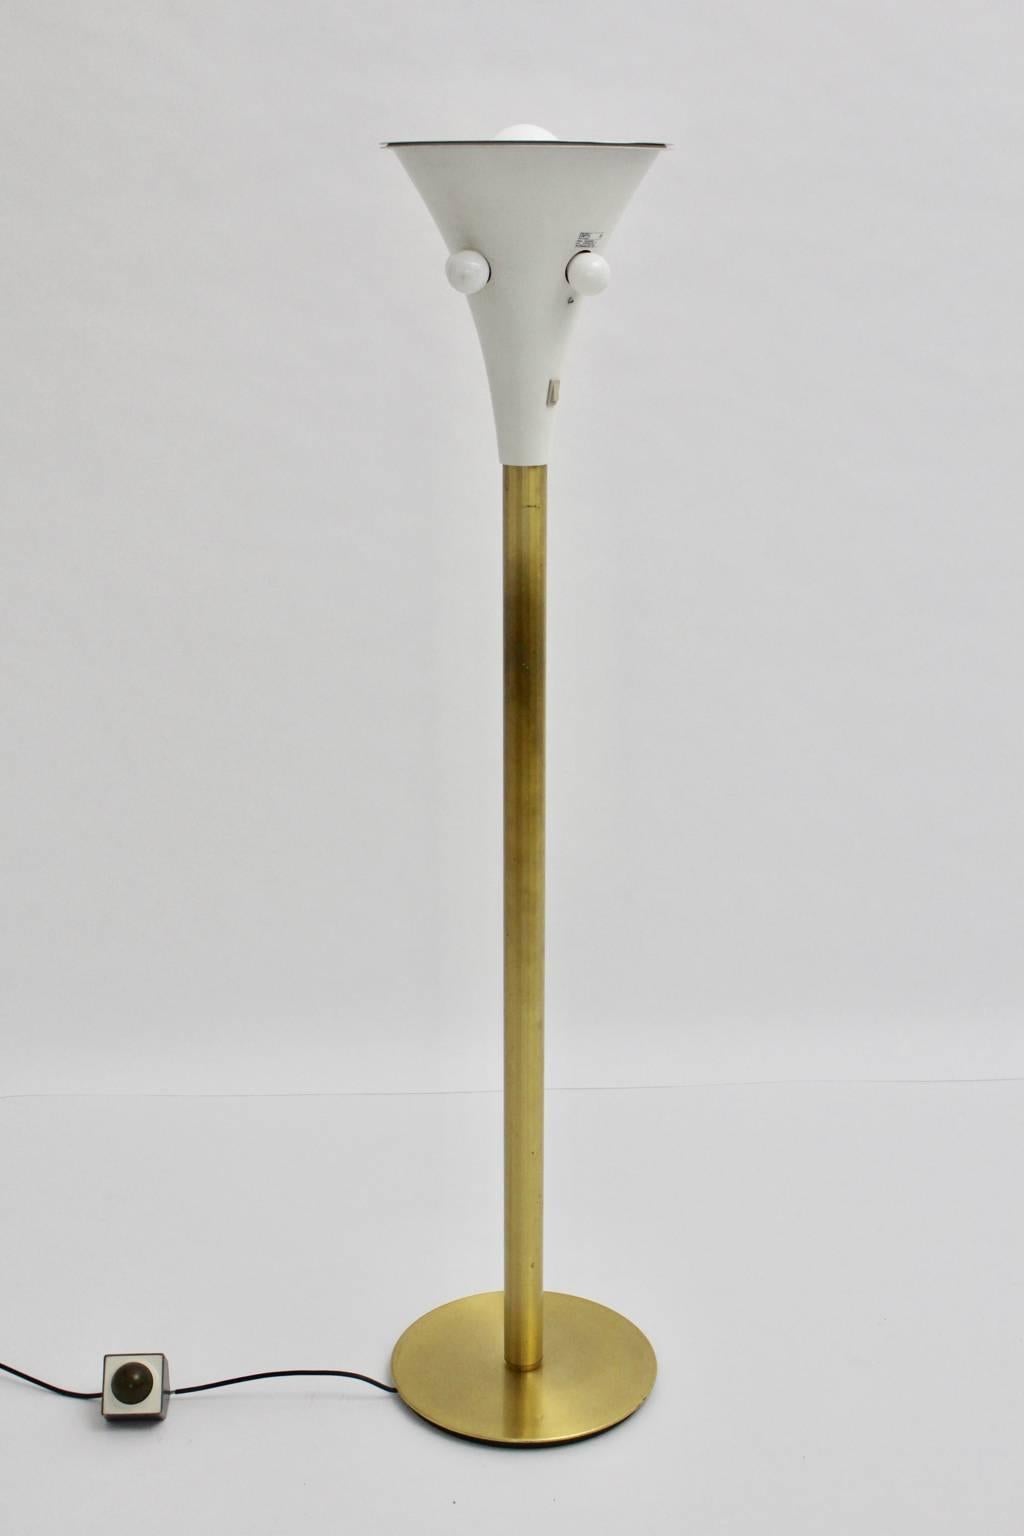 Mid century modern vintage floor lamp or uplighter by Staff Leuchten Germany 1960s with five sockets E 27, consists of cast iron, aluminium golden lacquered and aluminium white lacquered.
One central foot switch for all five bulbs to switch off